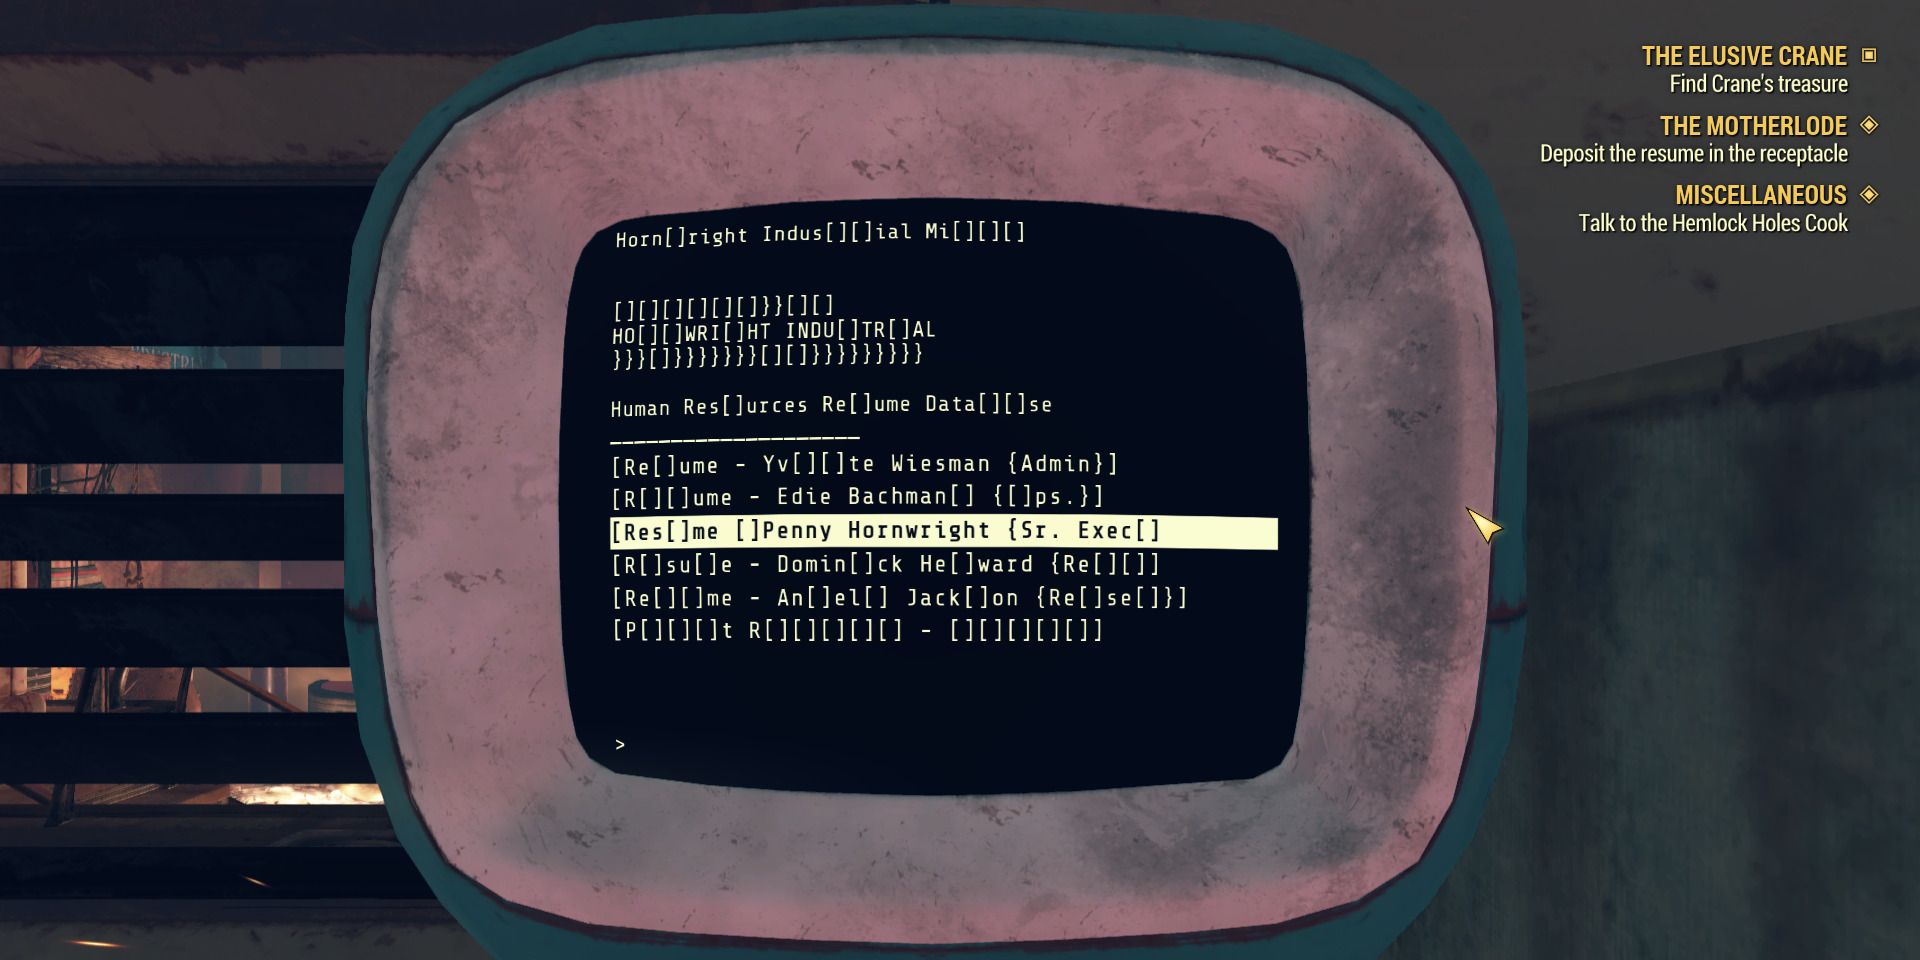 Image of the resume terminal in Fallout 76